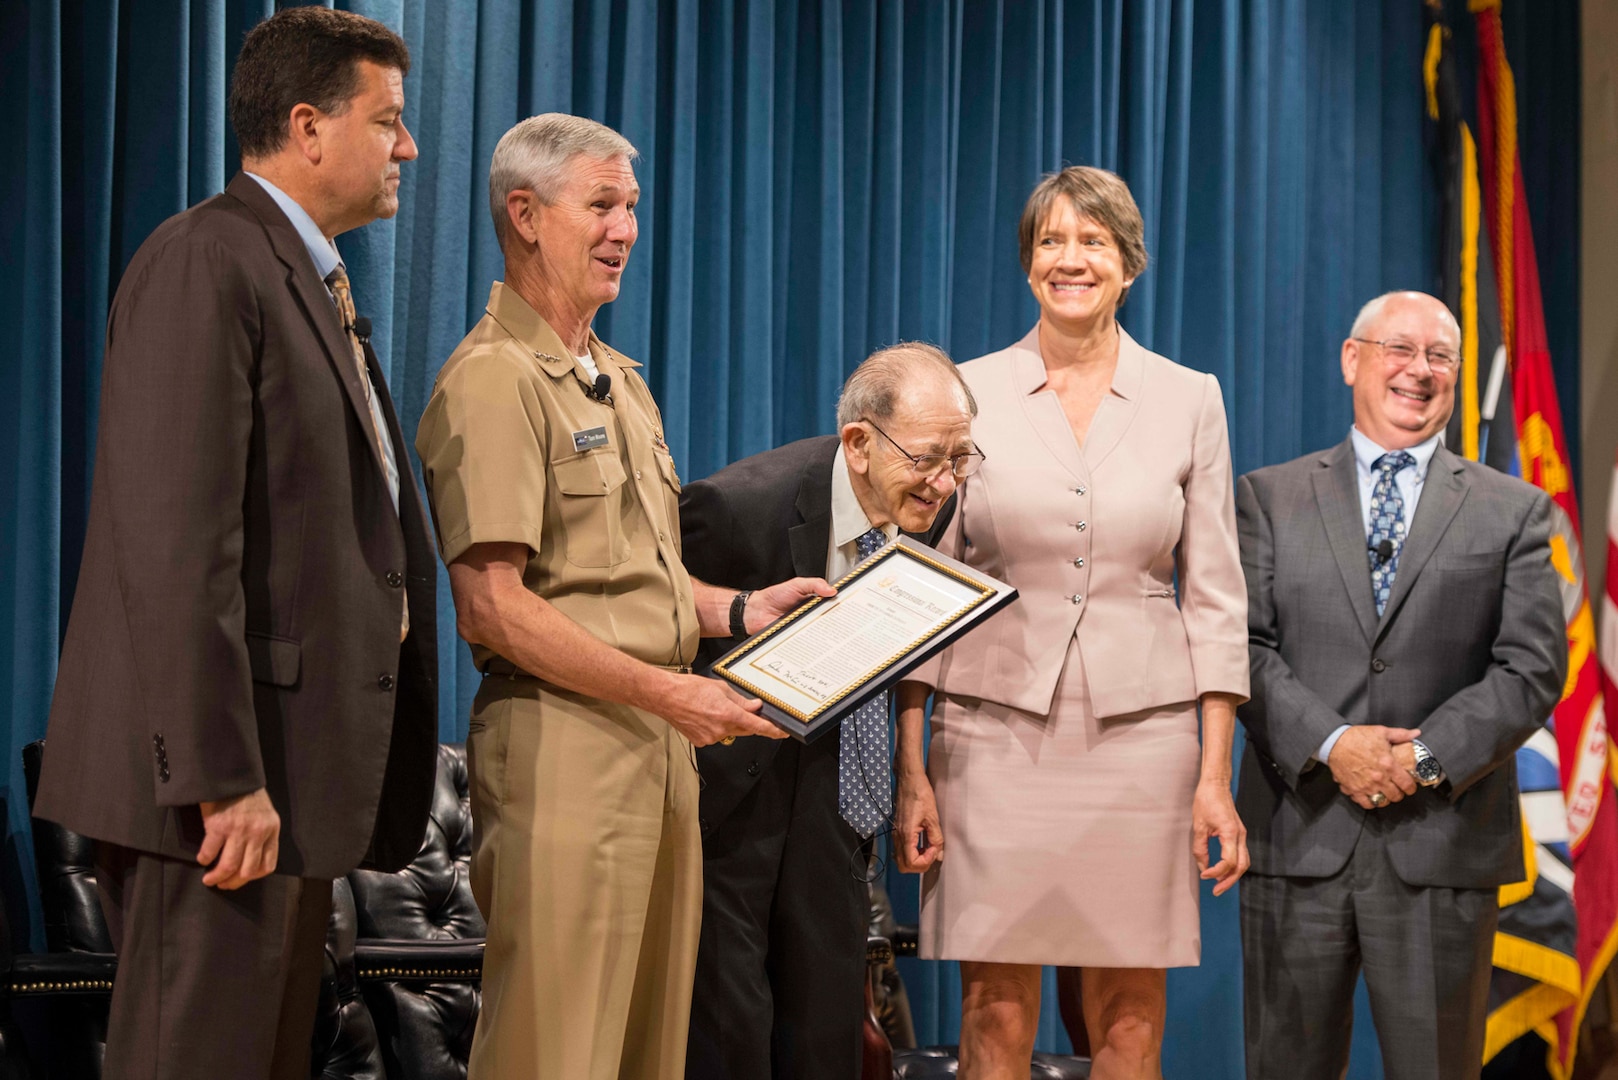 Sarkis Tatigian (center) receives an award during a celebration of his 75 years of federal service from Vice Adm. Thomas Moore, commander, Naval Sea Systems Command (NAVSEA), center left, at the Washington Navy Yard. Tatigian enlisted in the Navy in 1943 and currently serves as the associate director of small business programs at NAVSEA.